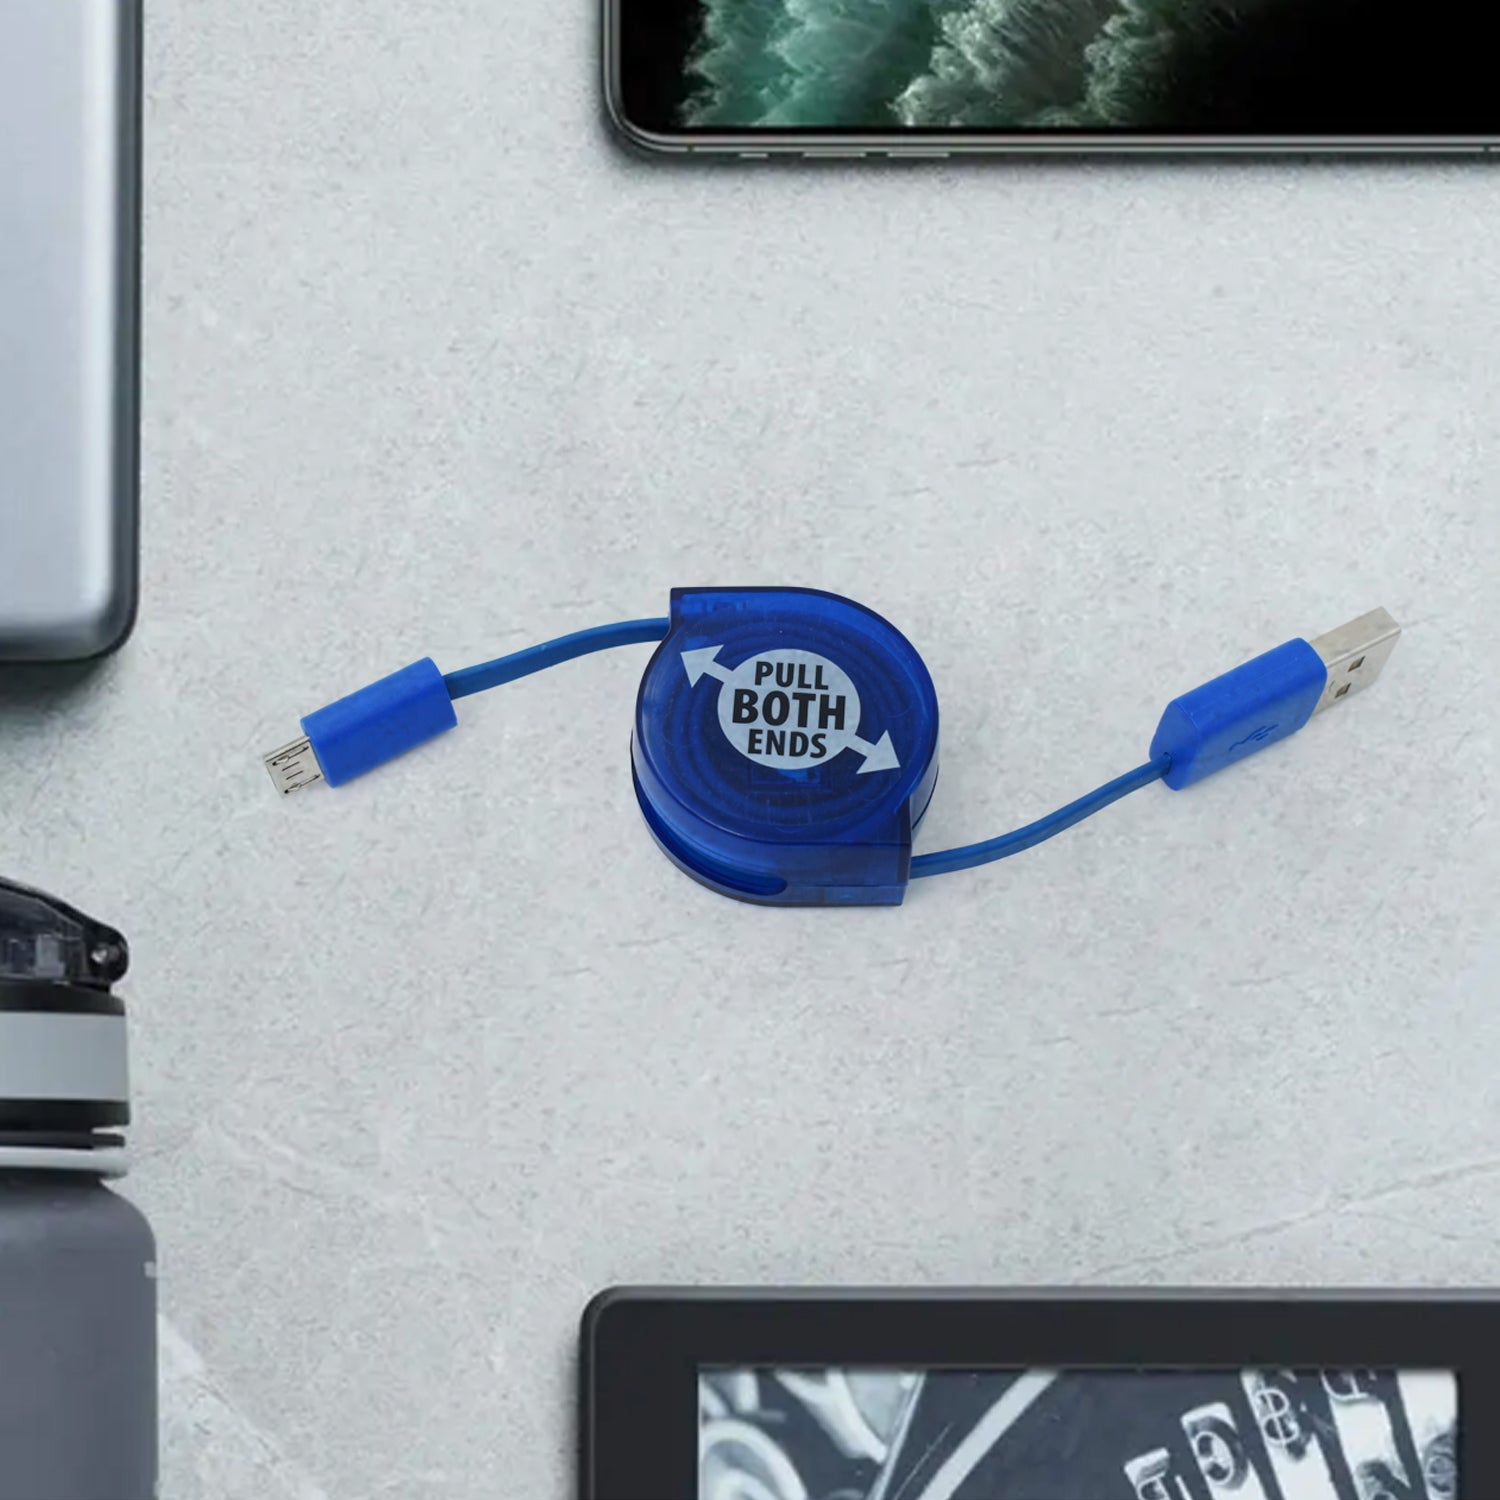 7400 Retractable Usb Charge widely used for charging various types of smartphones and technical devices present in all kind of places etc. DeoDap